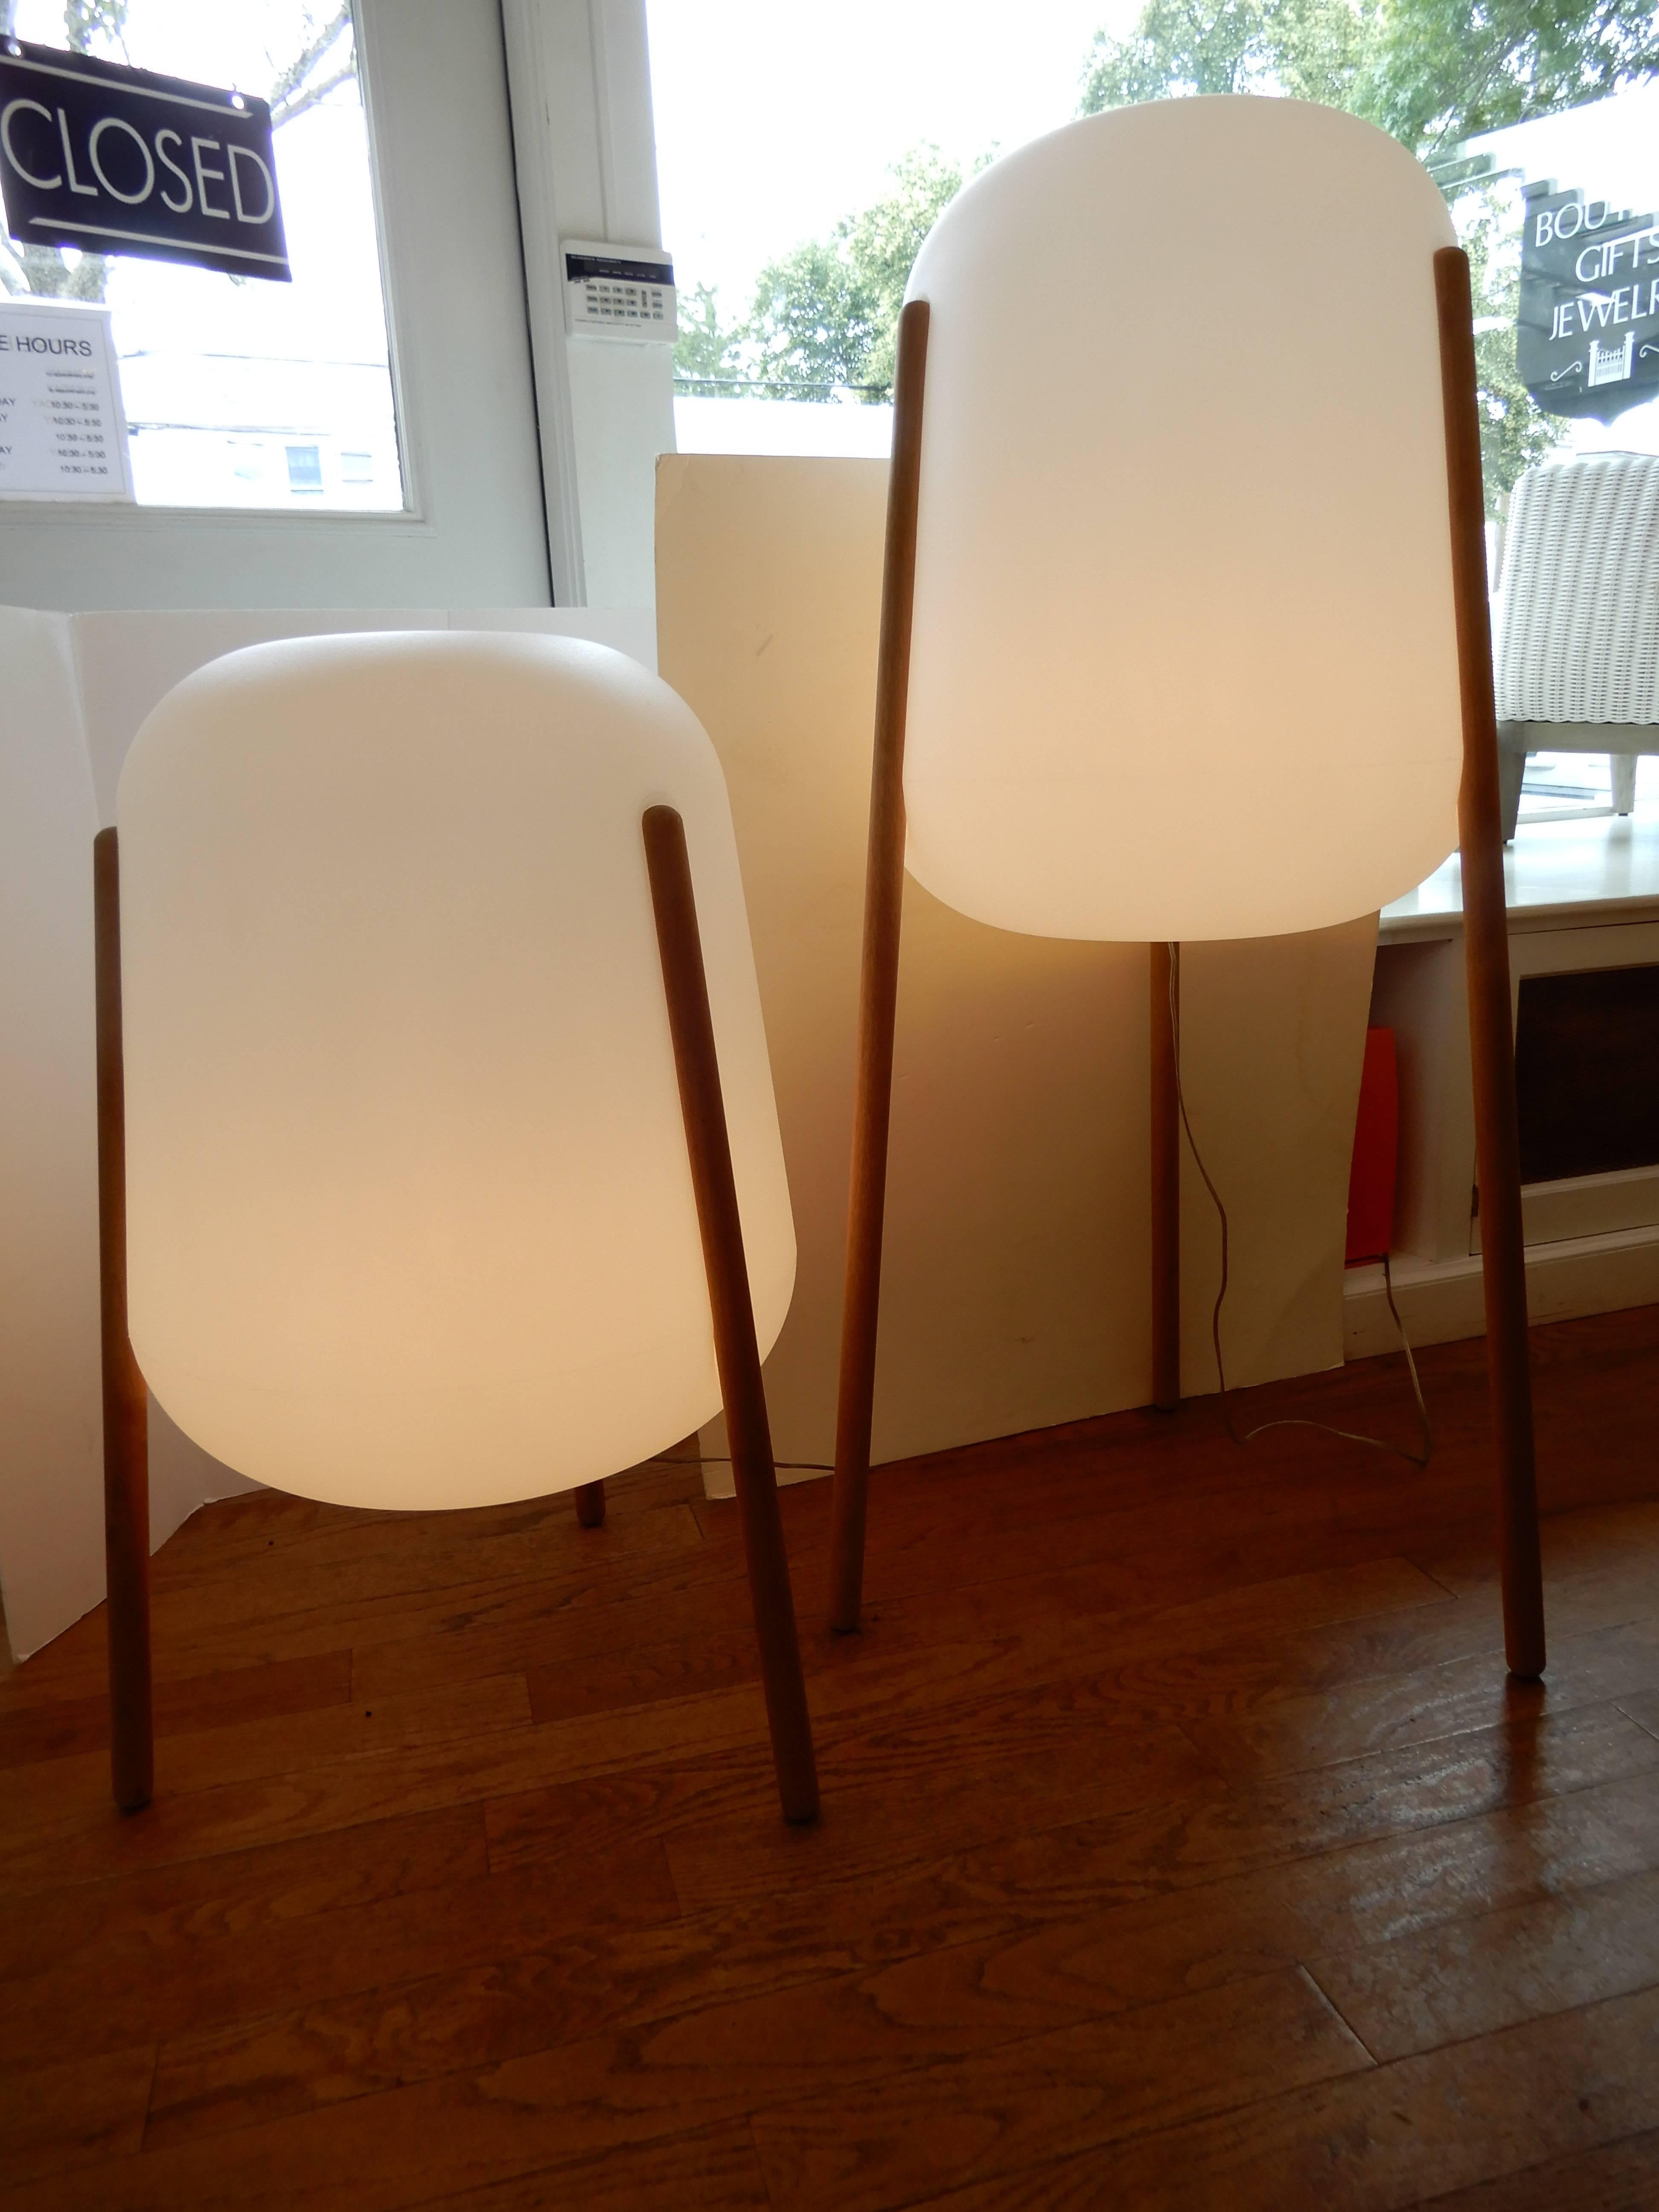 Pair of artisan indoor/outdoor tripod floor lamps. Resin encasement and tropical hardwood legs. The Lunar Lights provide a calm and warming aura especially at night with the ambiance of a lantern, substantial lighting for night time gatherings.